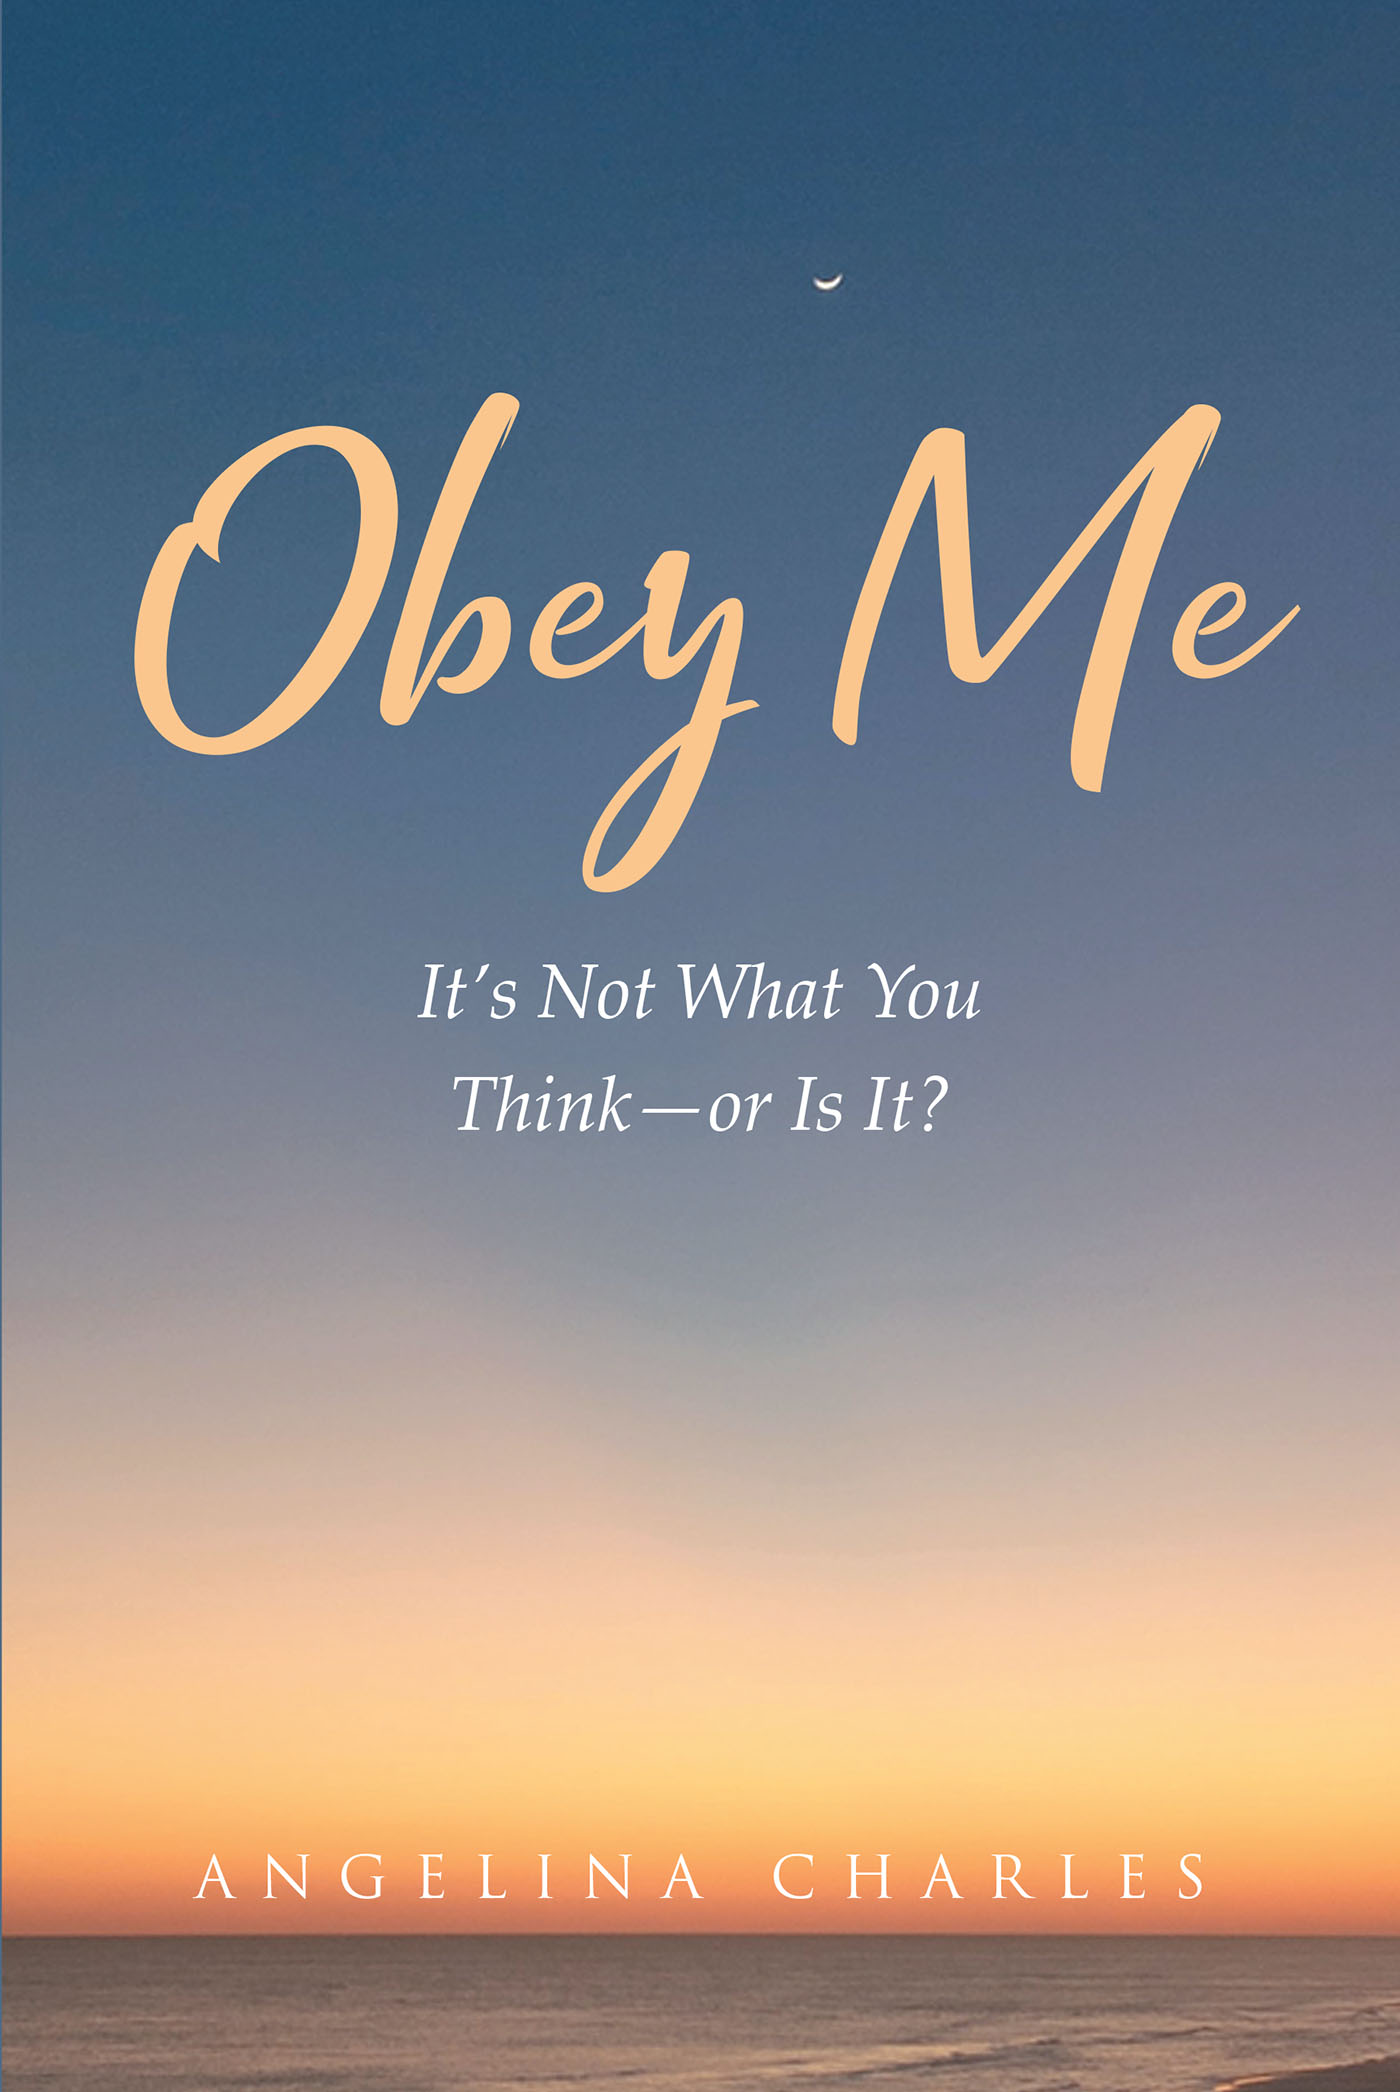 Author Angelina Charles’s New Book, “Obey Me: It’s Not What You Think—Or Is It?” Helps Readers Understand That Obedience is a Gift of Grace